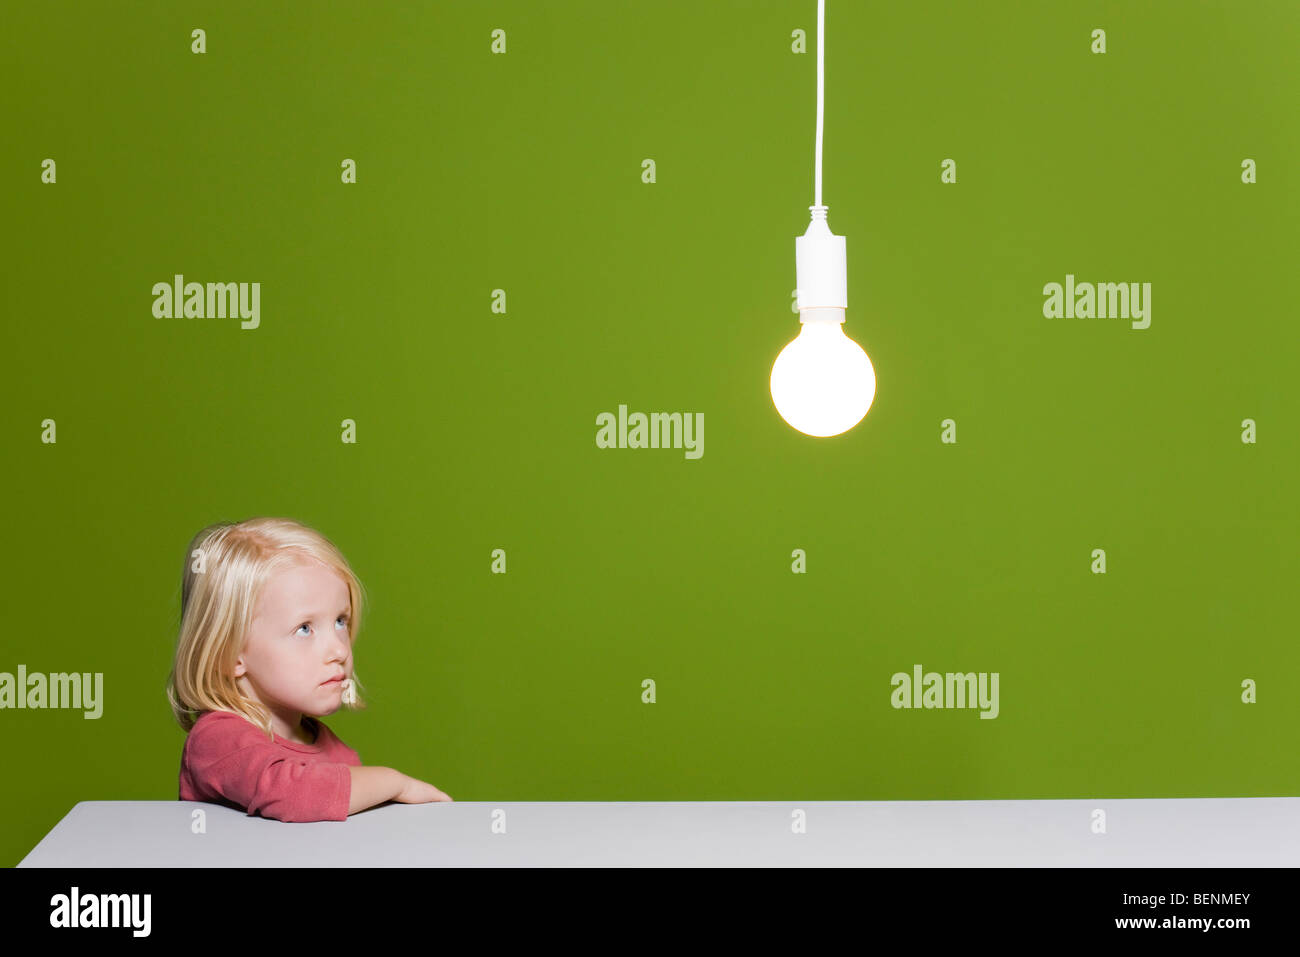 Little girl biting lip looking with concern up at illuminated light bulb suspended overhead Stock Photo